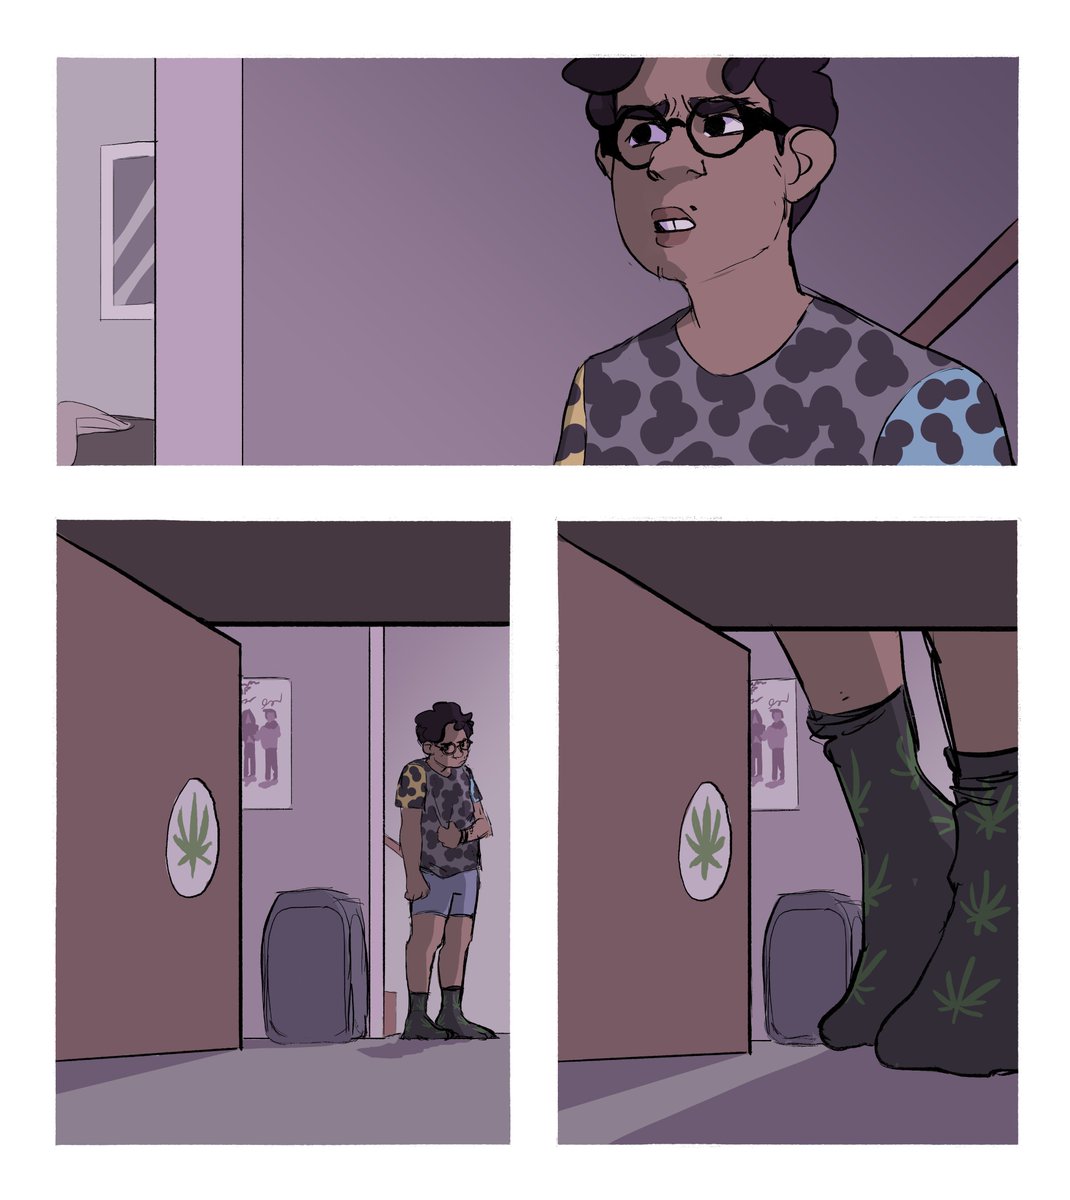 It's been..... almost a full year since the last time I posted a #weedbinderchronicles page but better late than never I guess. (Following "The Pants Song") #bemorechill 